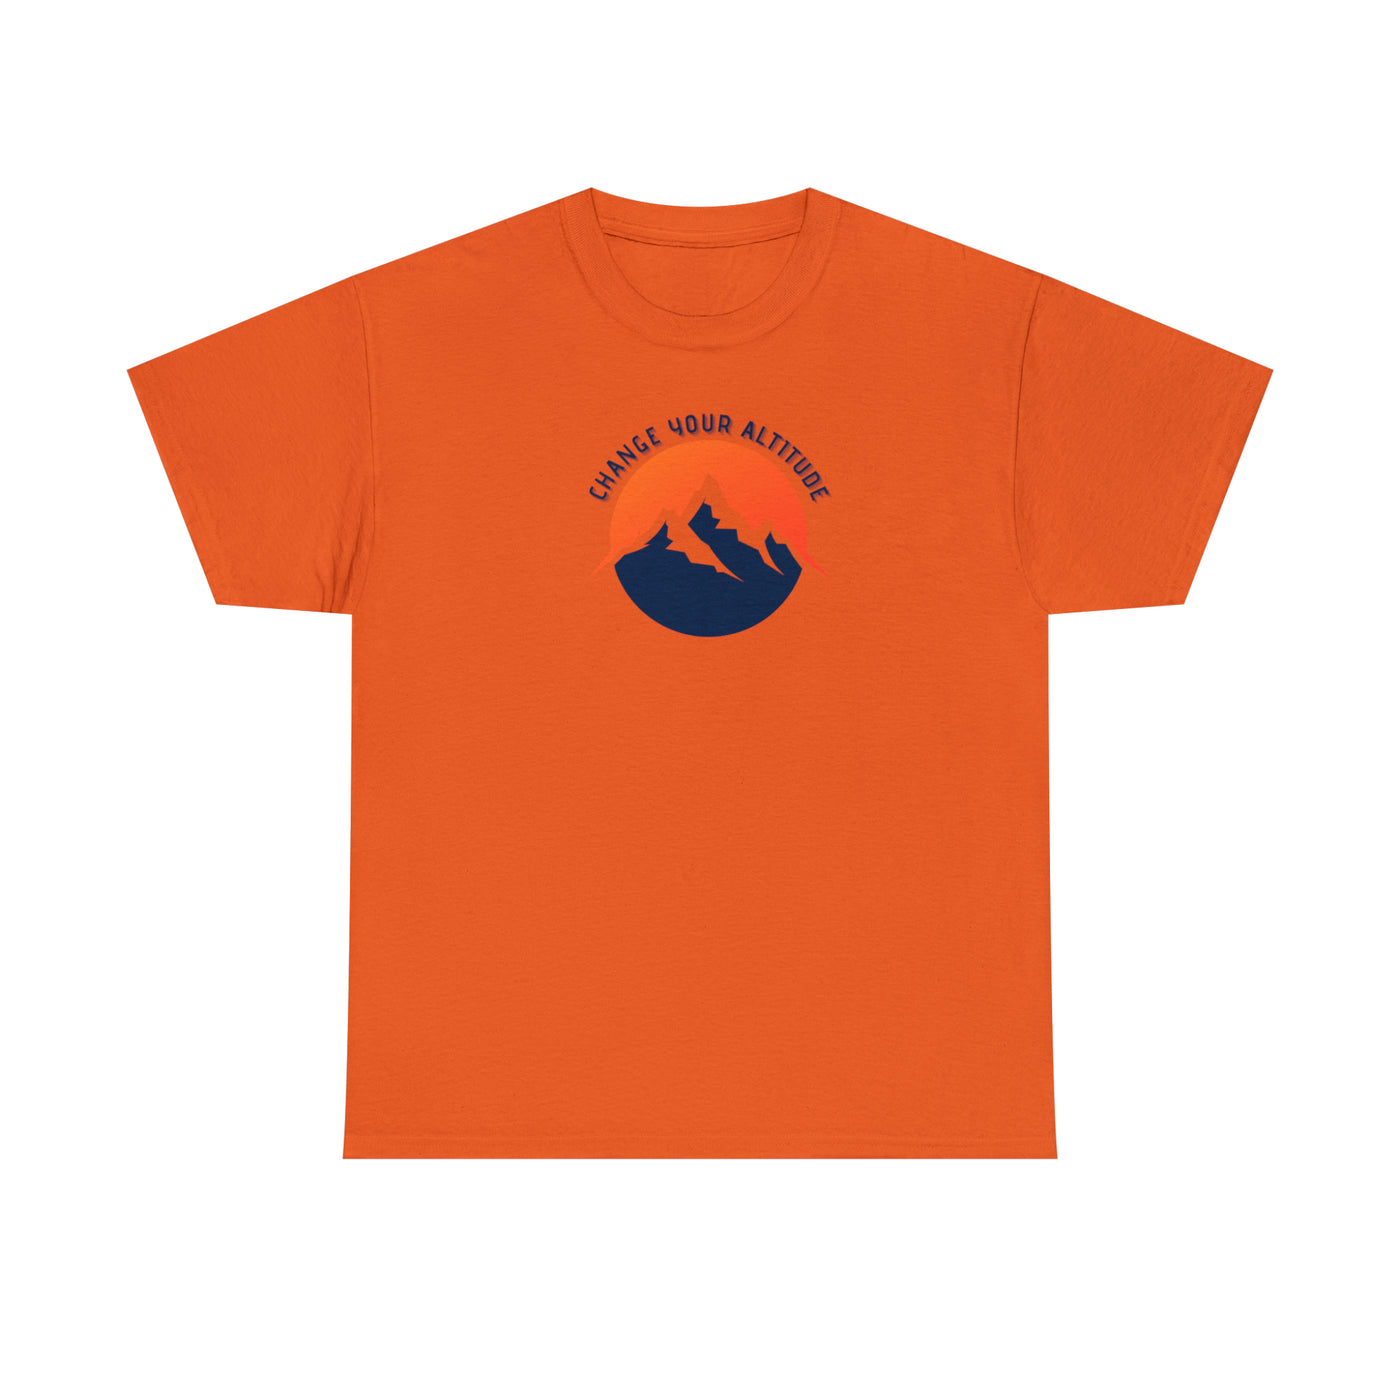 Custom Printed T-Shirts | Camping Heavy Cotton Tee | Let's Travel